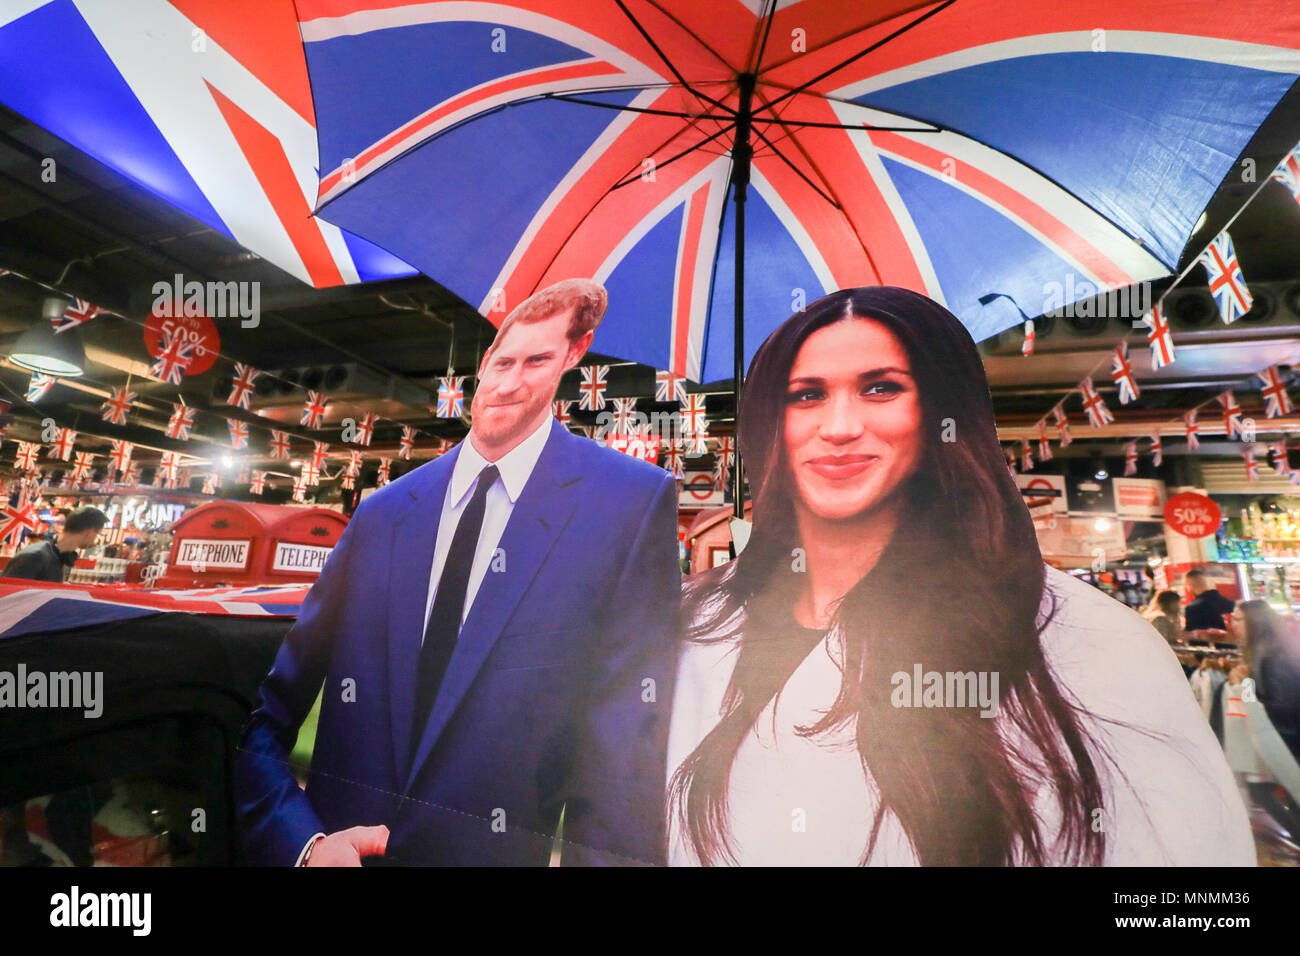 London UK. 18th May 2018. Souvenirs featuring Britain's Prince Harry and his fiance, US actress Meghan Markle are displayed in a Glorious Britain gift shop and provide a popular tourist attraction in Picaddily as the couple tie the knot on 19 May Credit: amer ghazzal/Alamy Live News Stock Photo